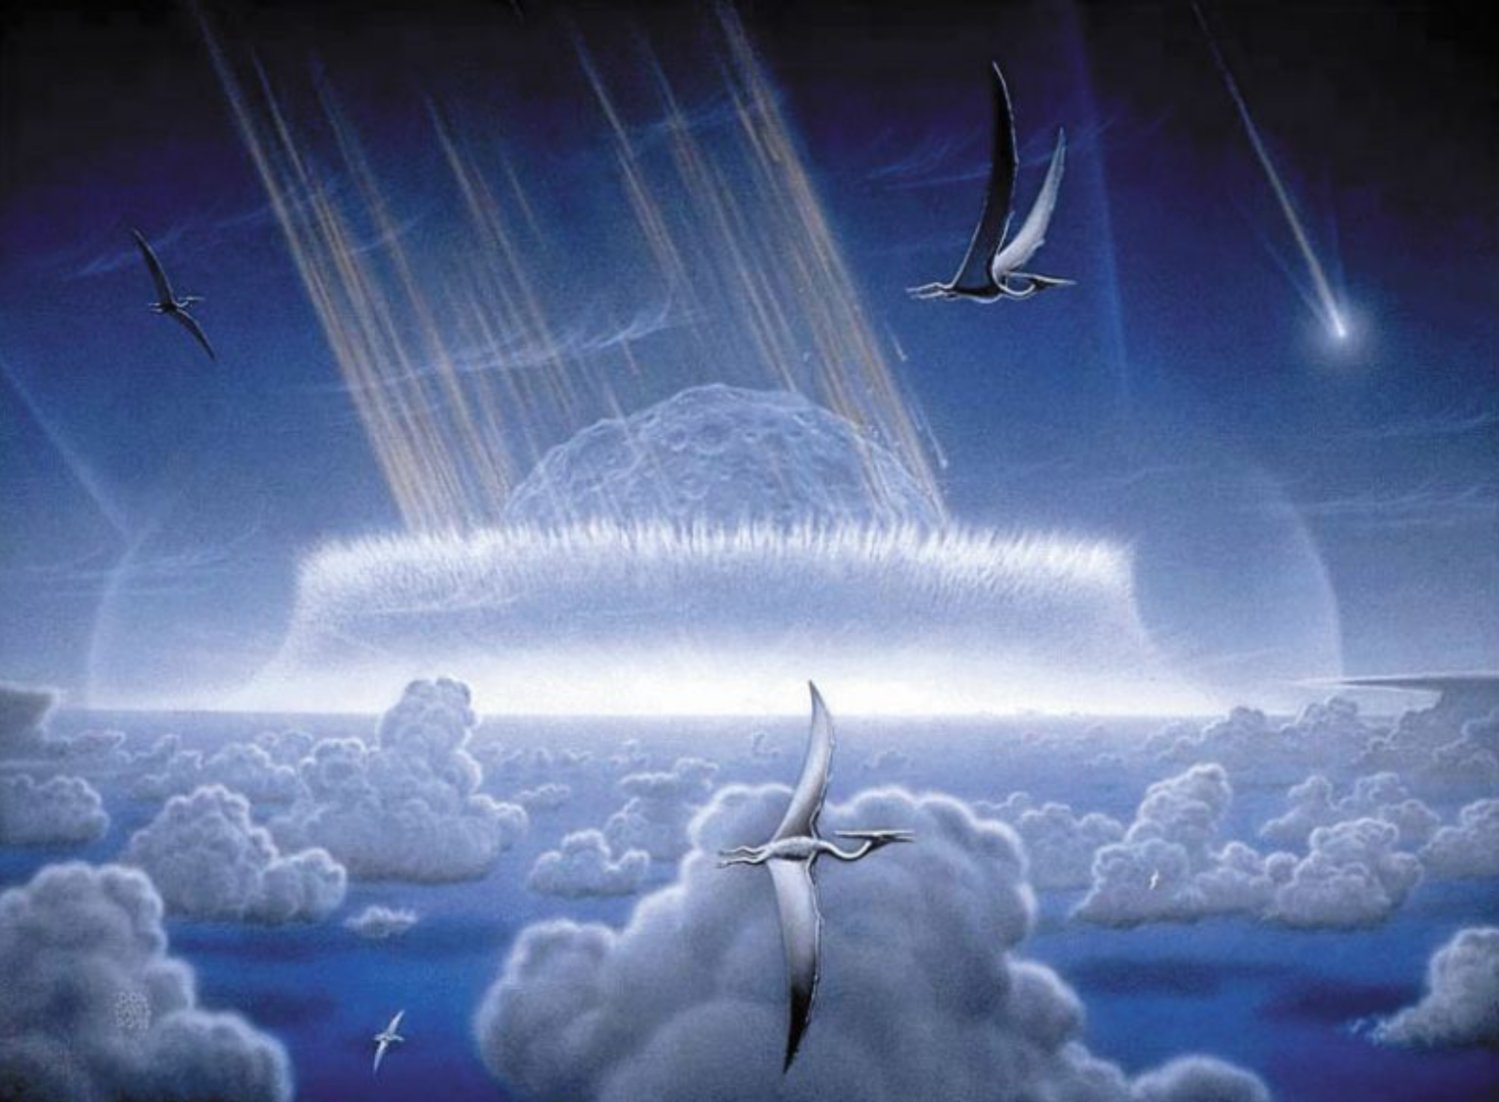 An artist’s concept of an asteroid striking Earth during the age of the dinosaurs.